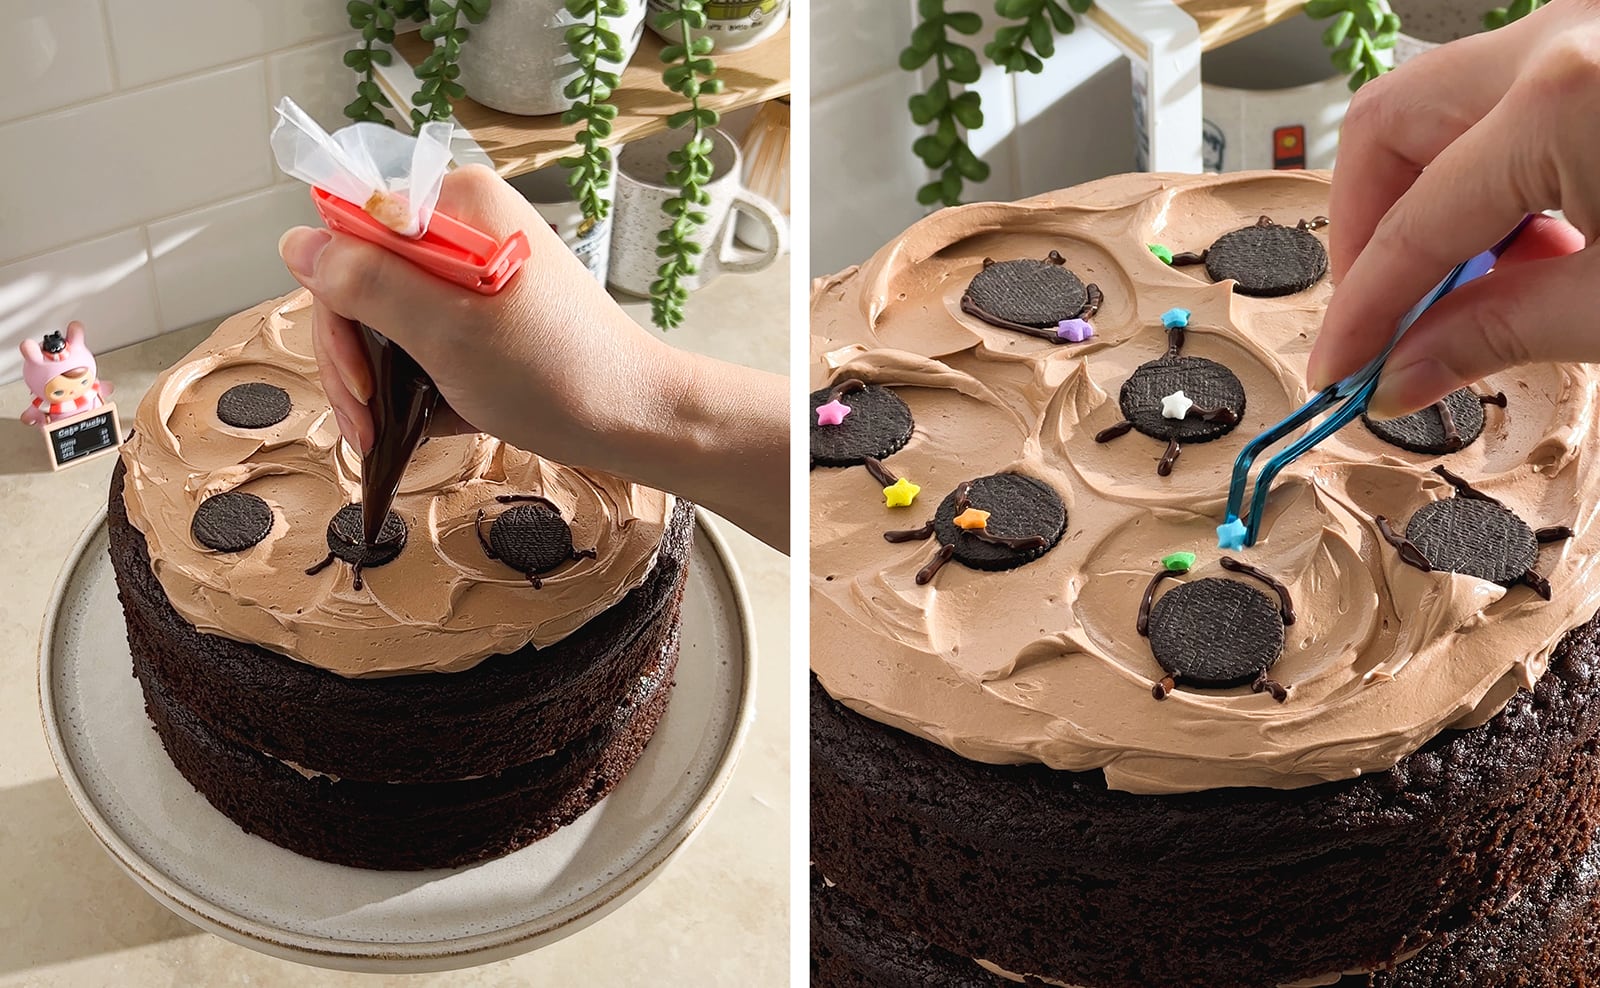 Left to right: piping melted chocolate on top of cake, hand placing star sprinkles on cake with tweezers.